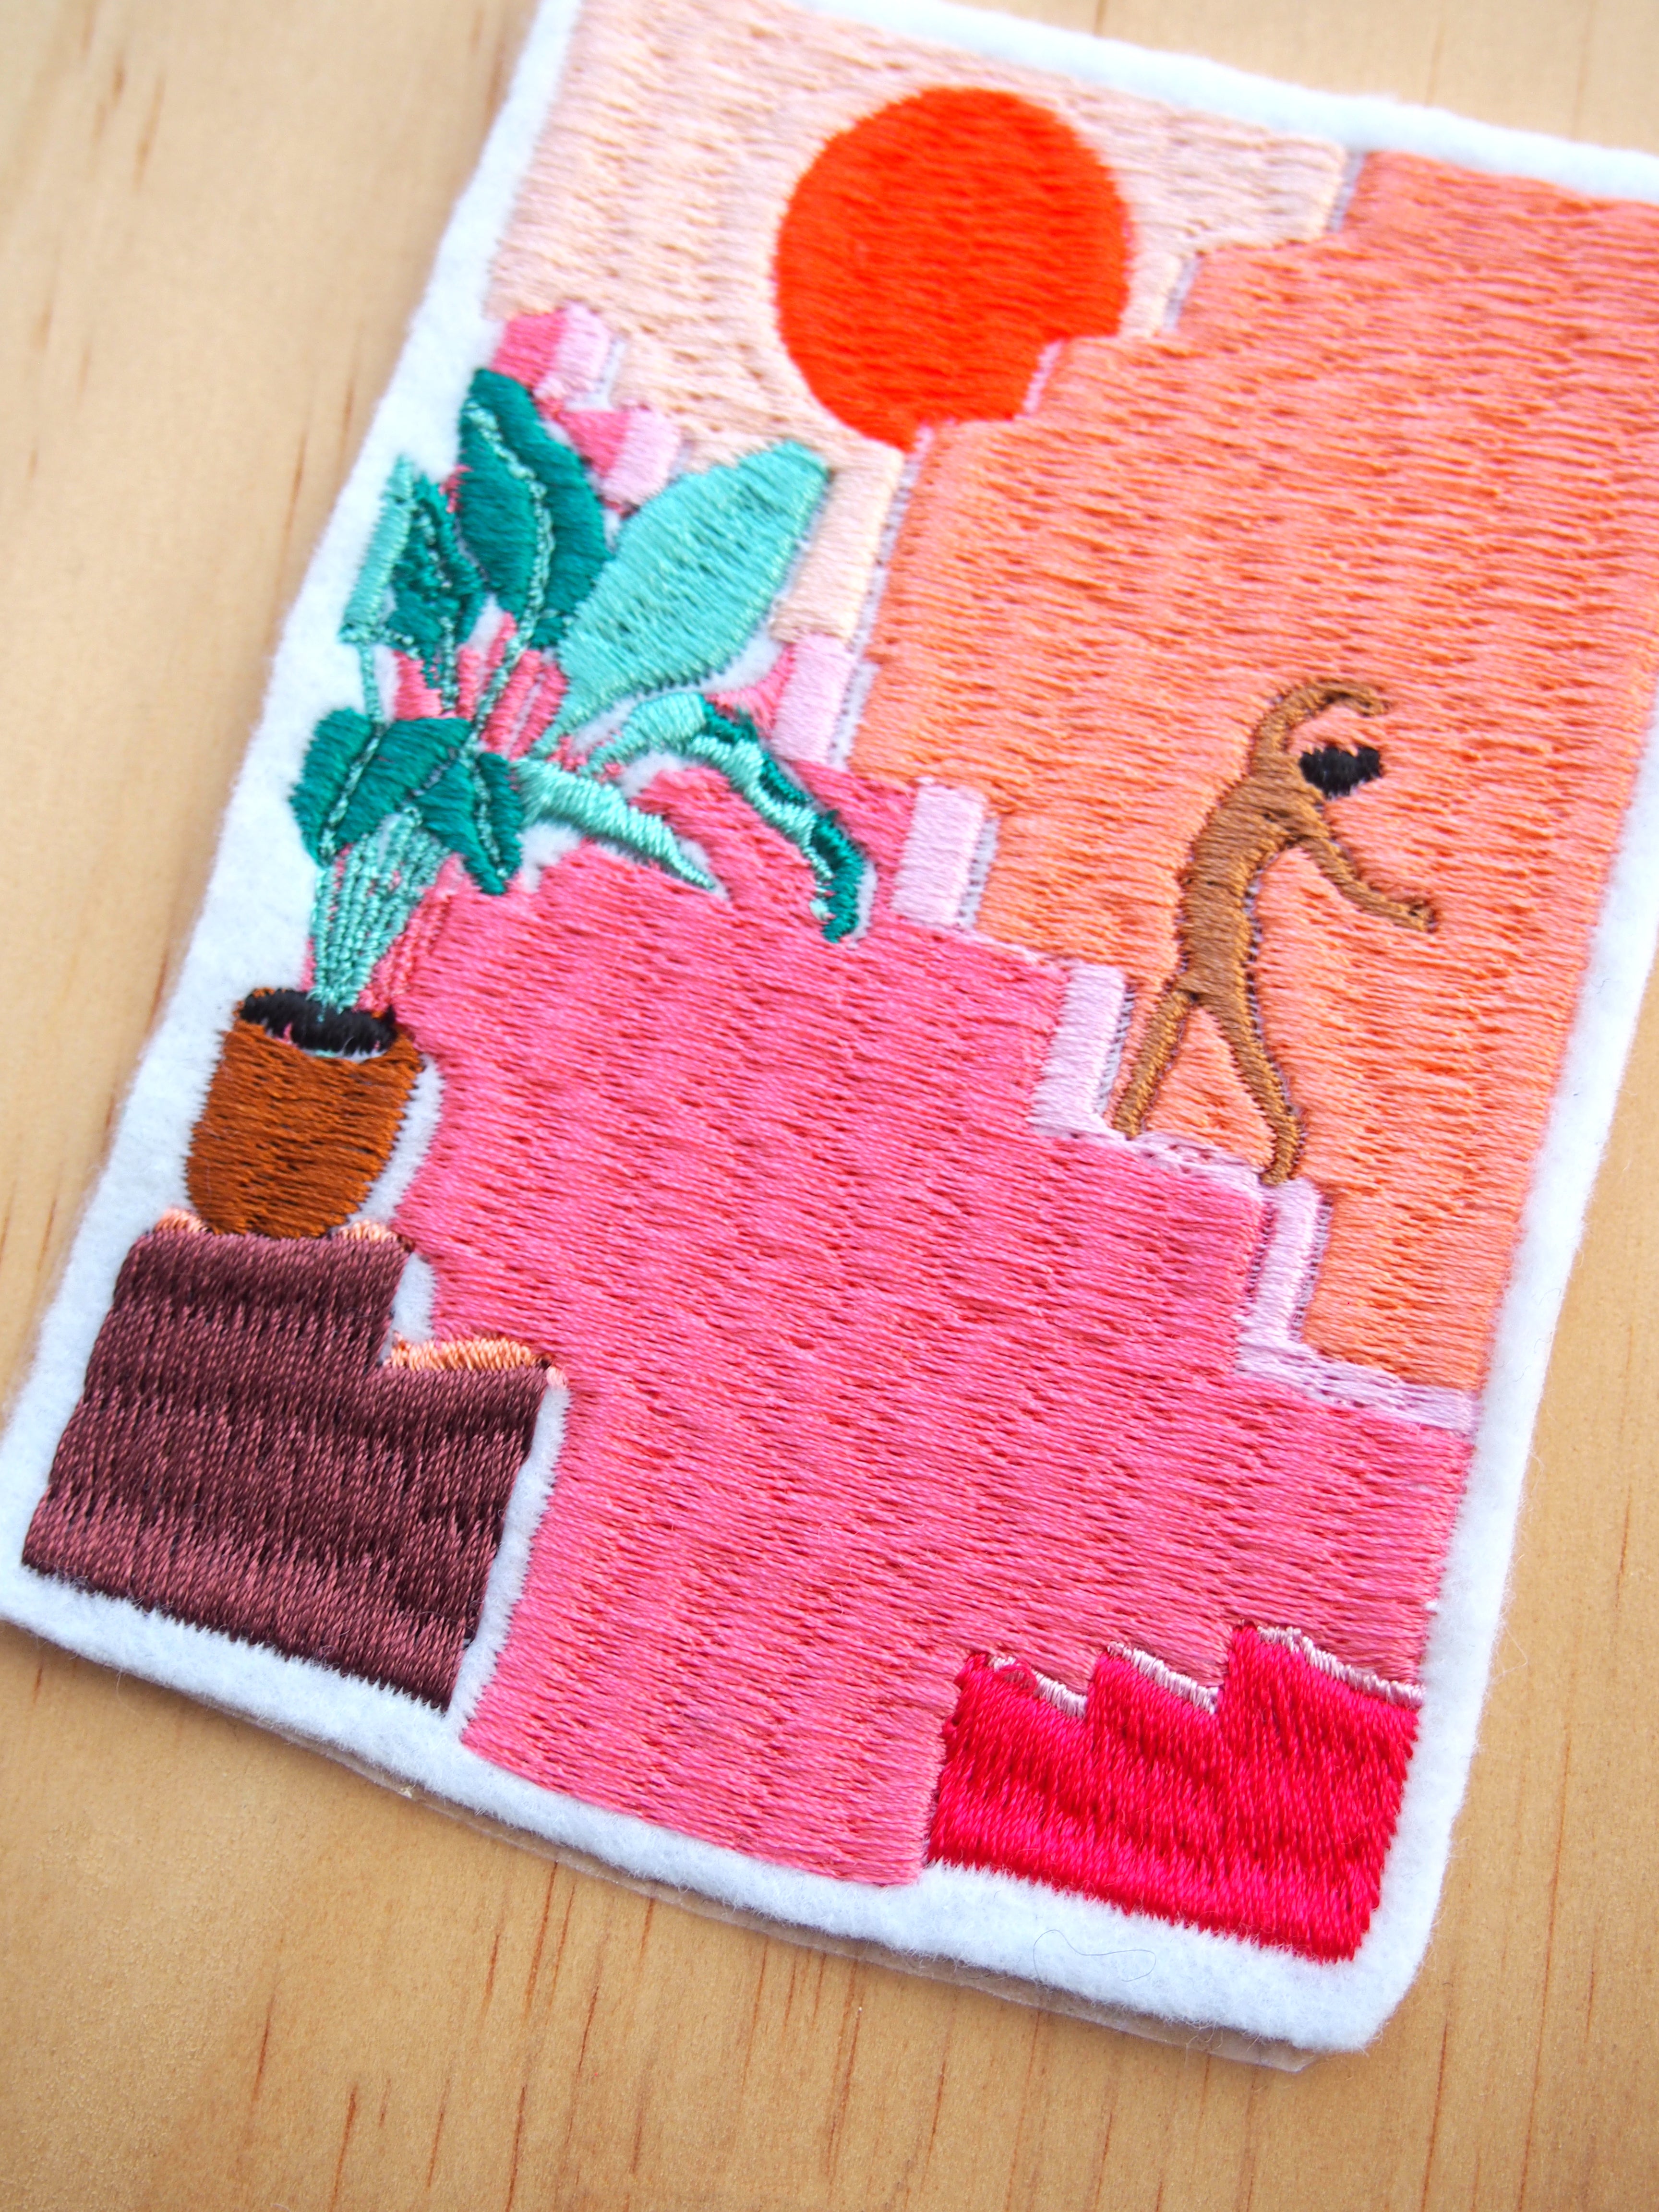 Pink stairs embroidery (almost perfect)